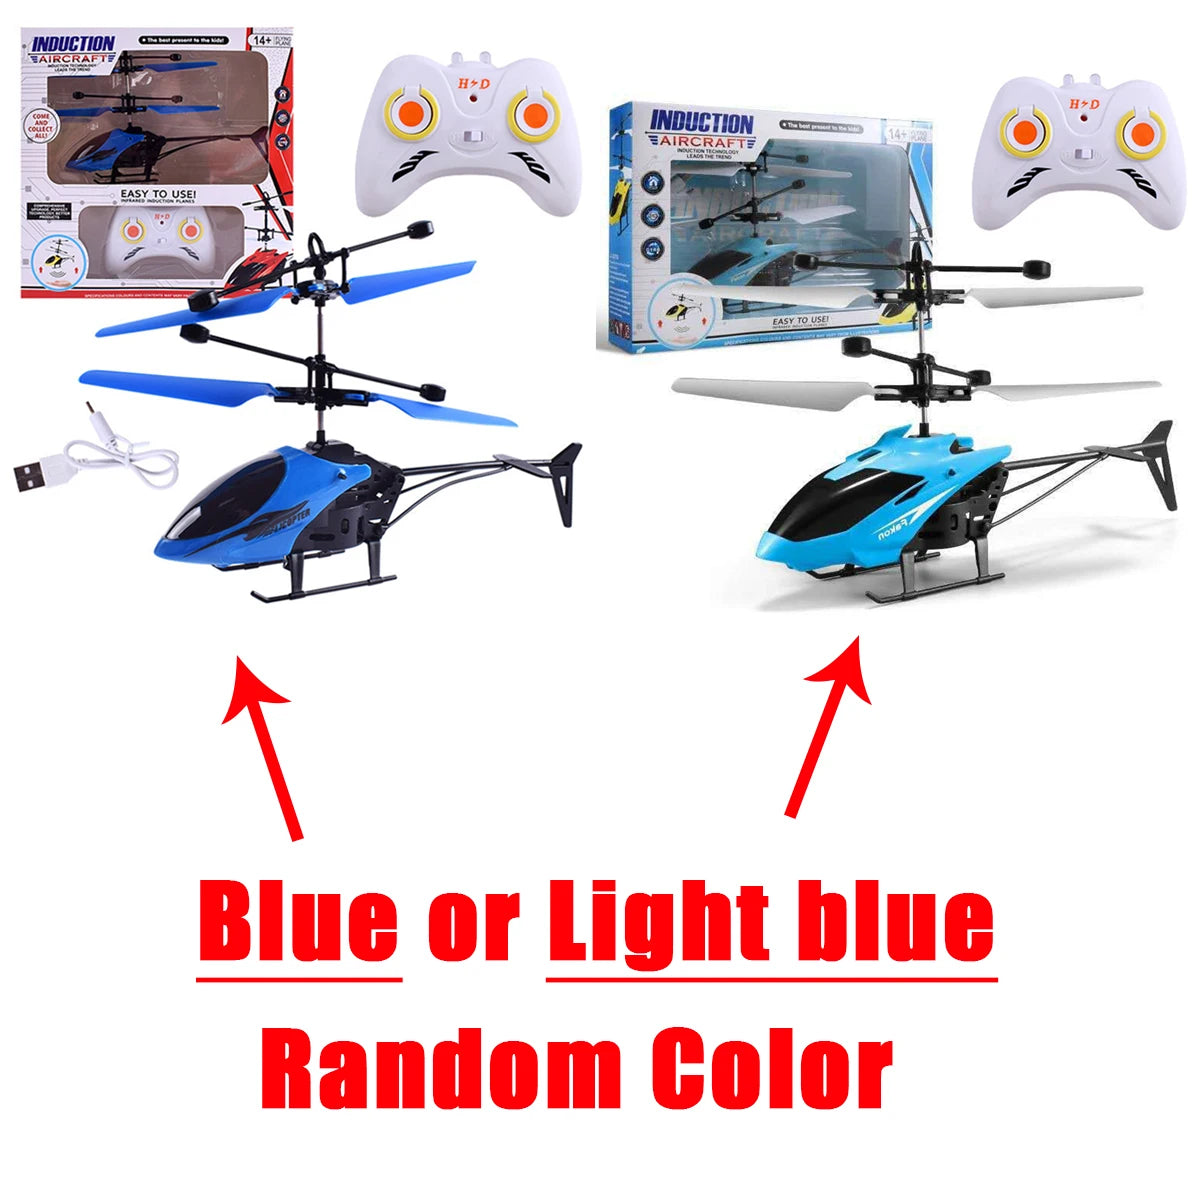 CY-38 Rc Helicopter, INDUCTION ARCRAF EAsy TQ USEI EASY